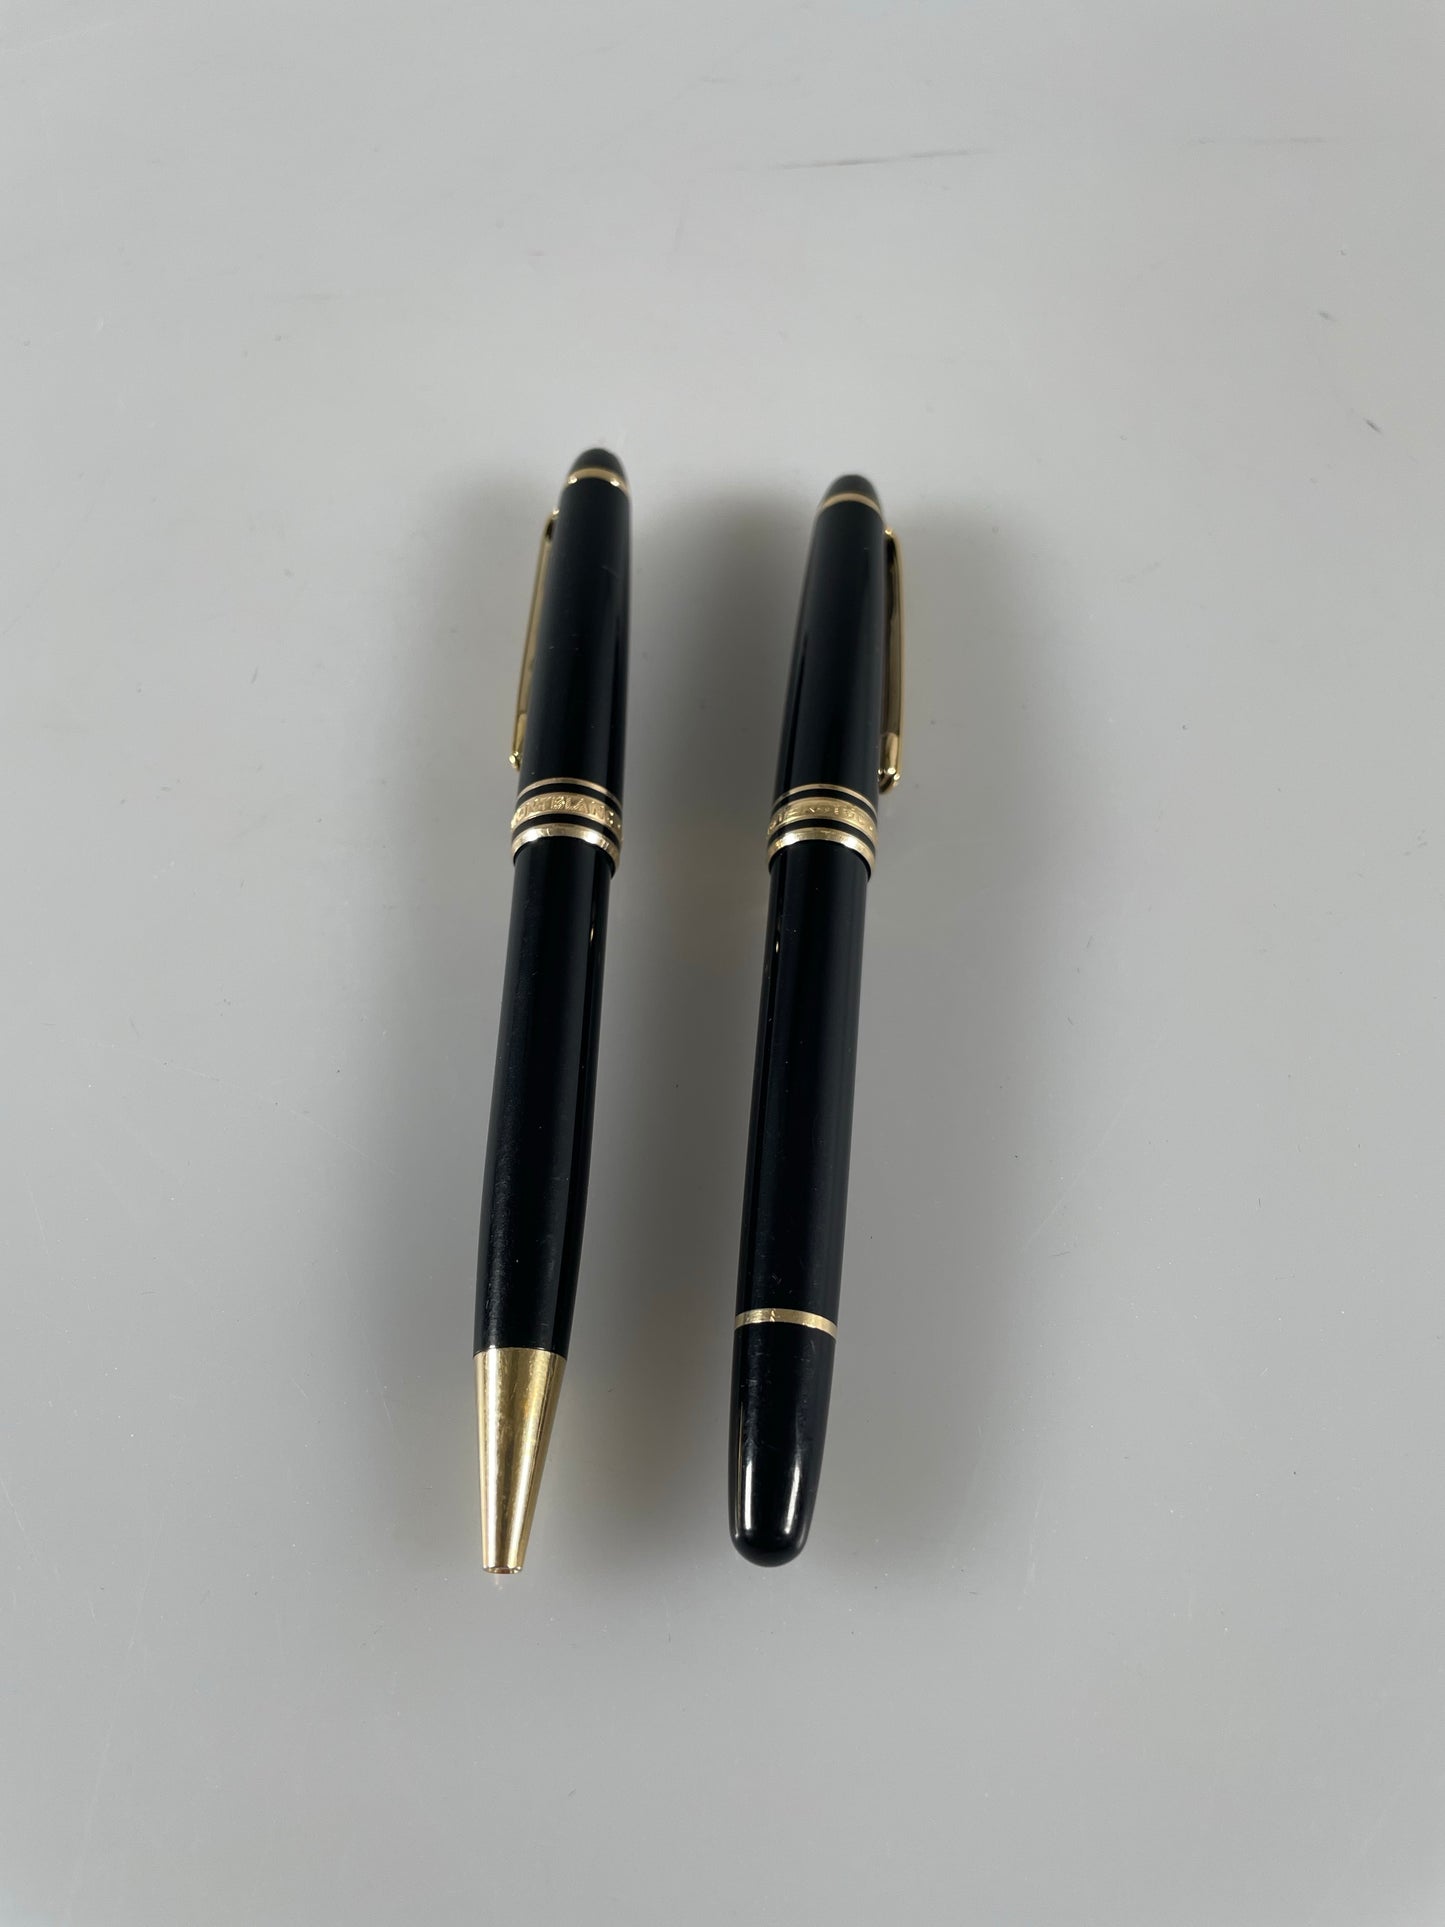 Vintage Montblanc Meisterstuck Black Fountain Pen and ball point 4810 14k Gold 585 w/ ink